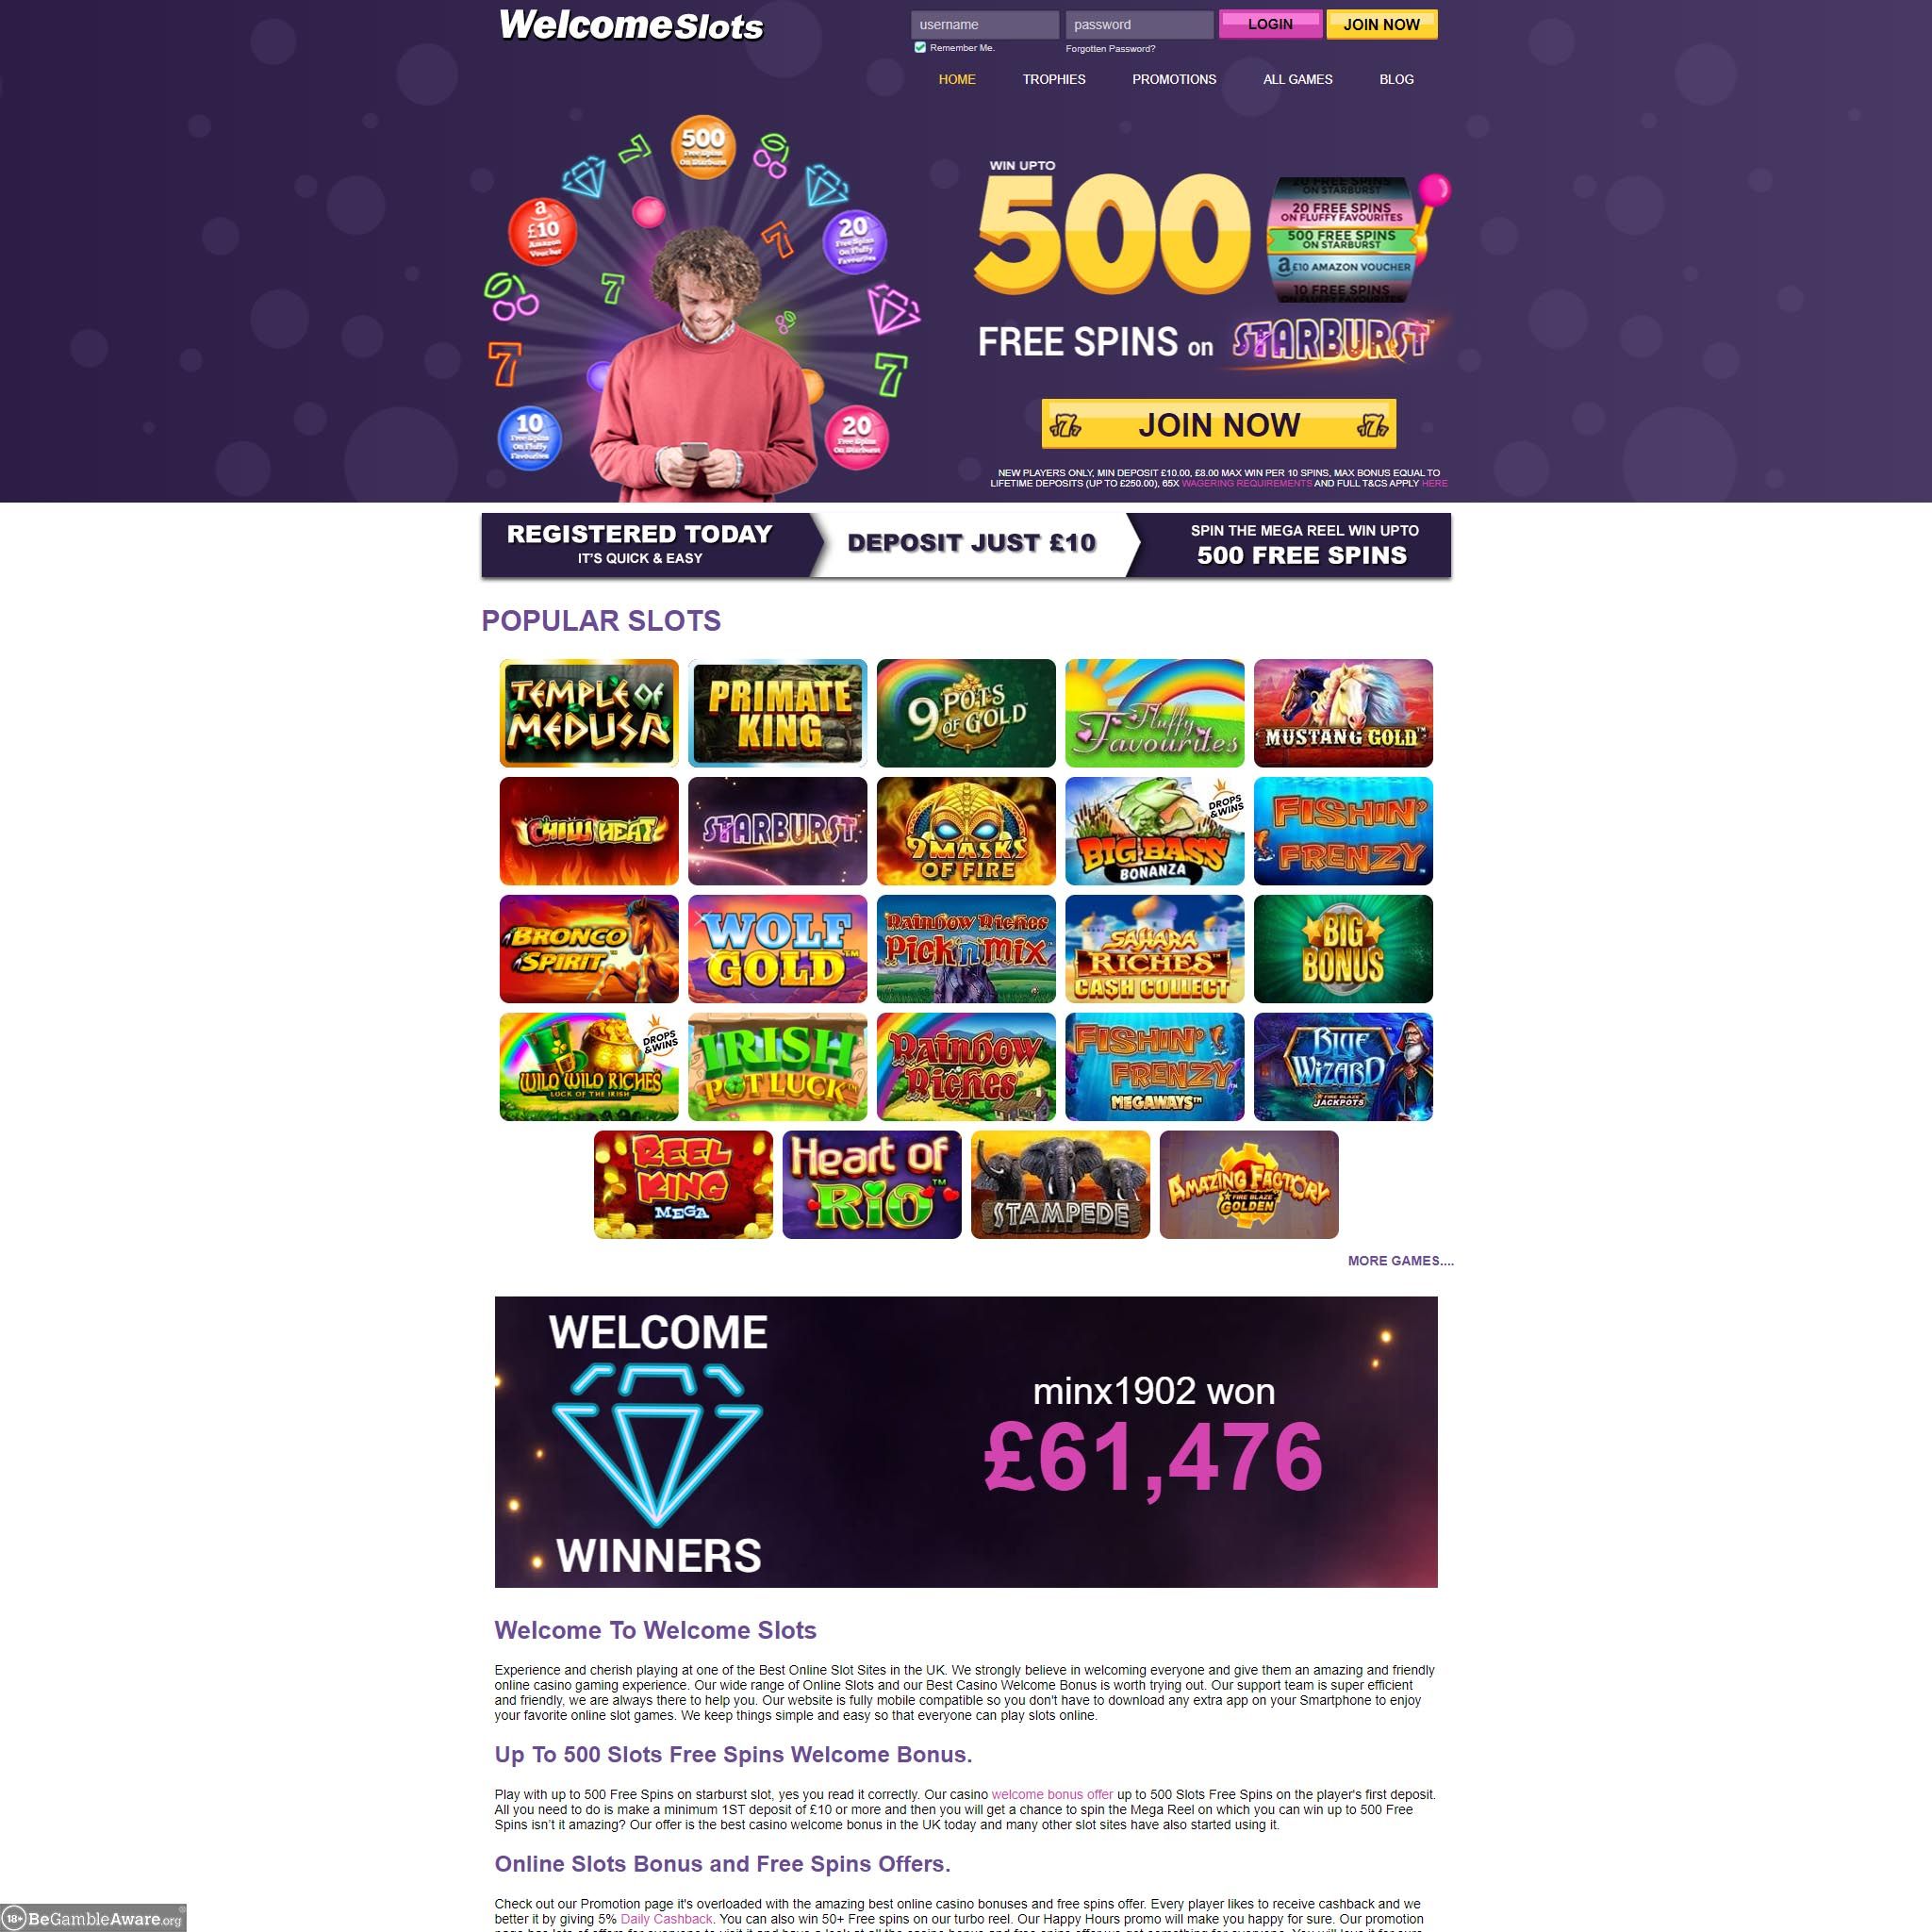 Welcome Slots Casino review